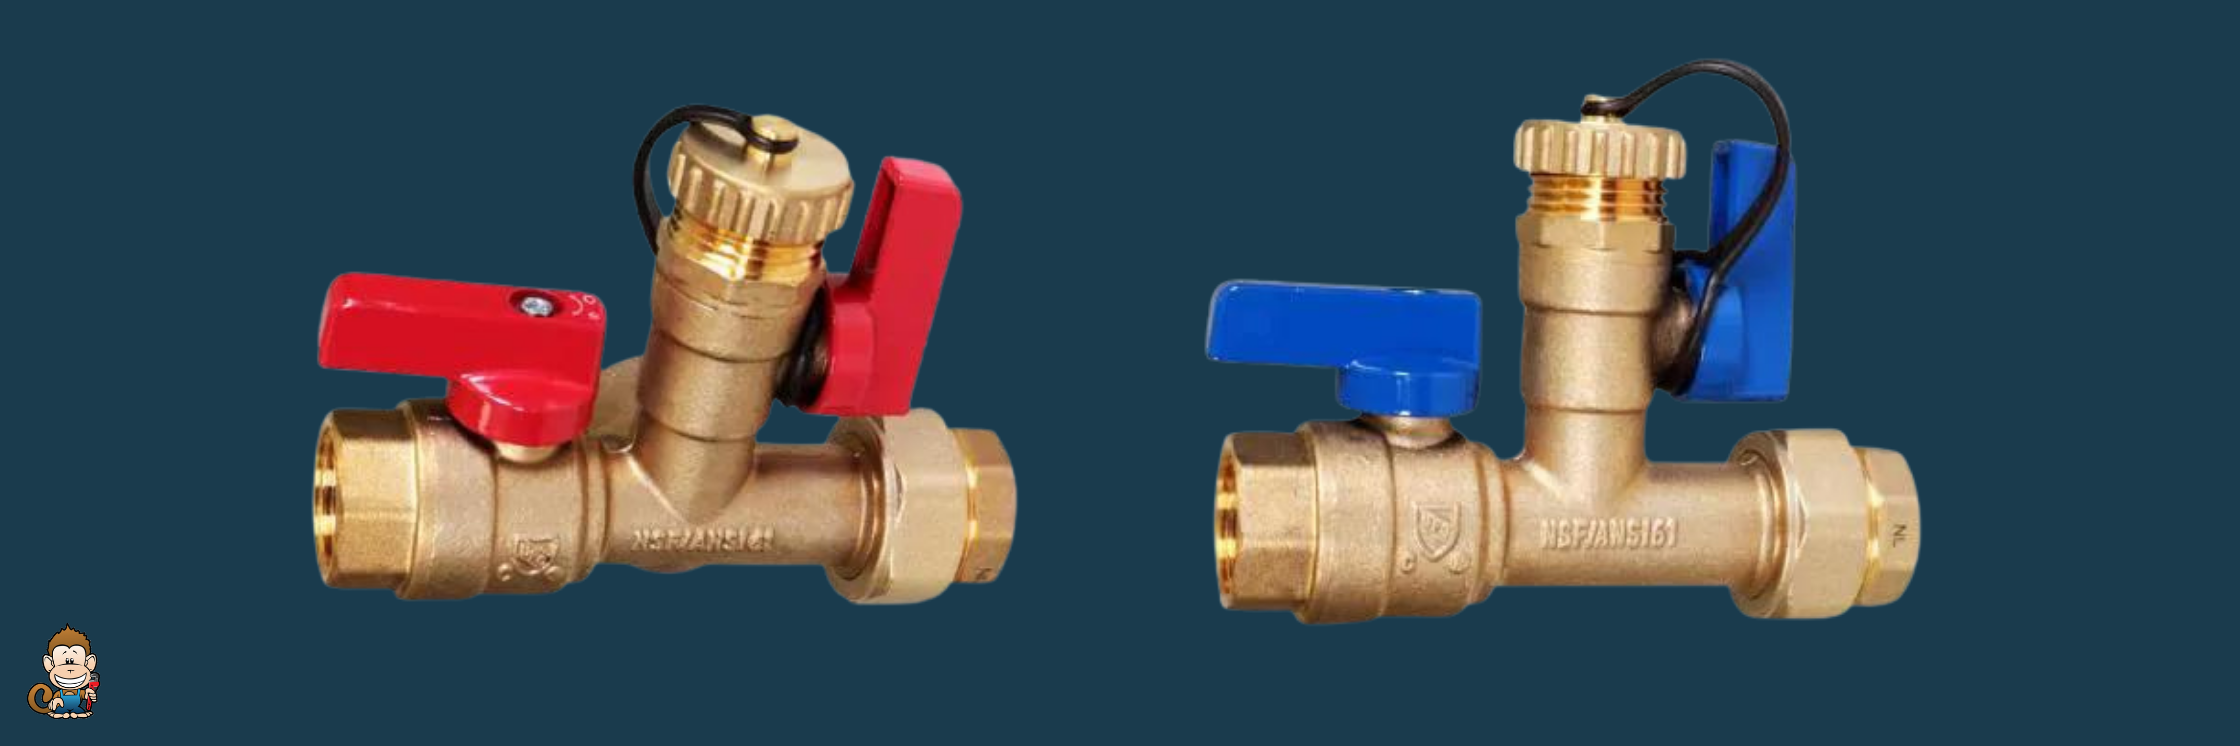 What Are Isolation Valves for Tankless Water Heaters?